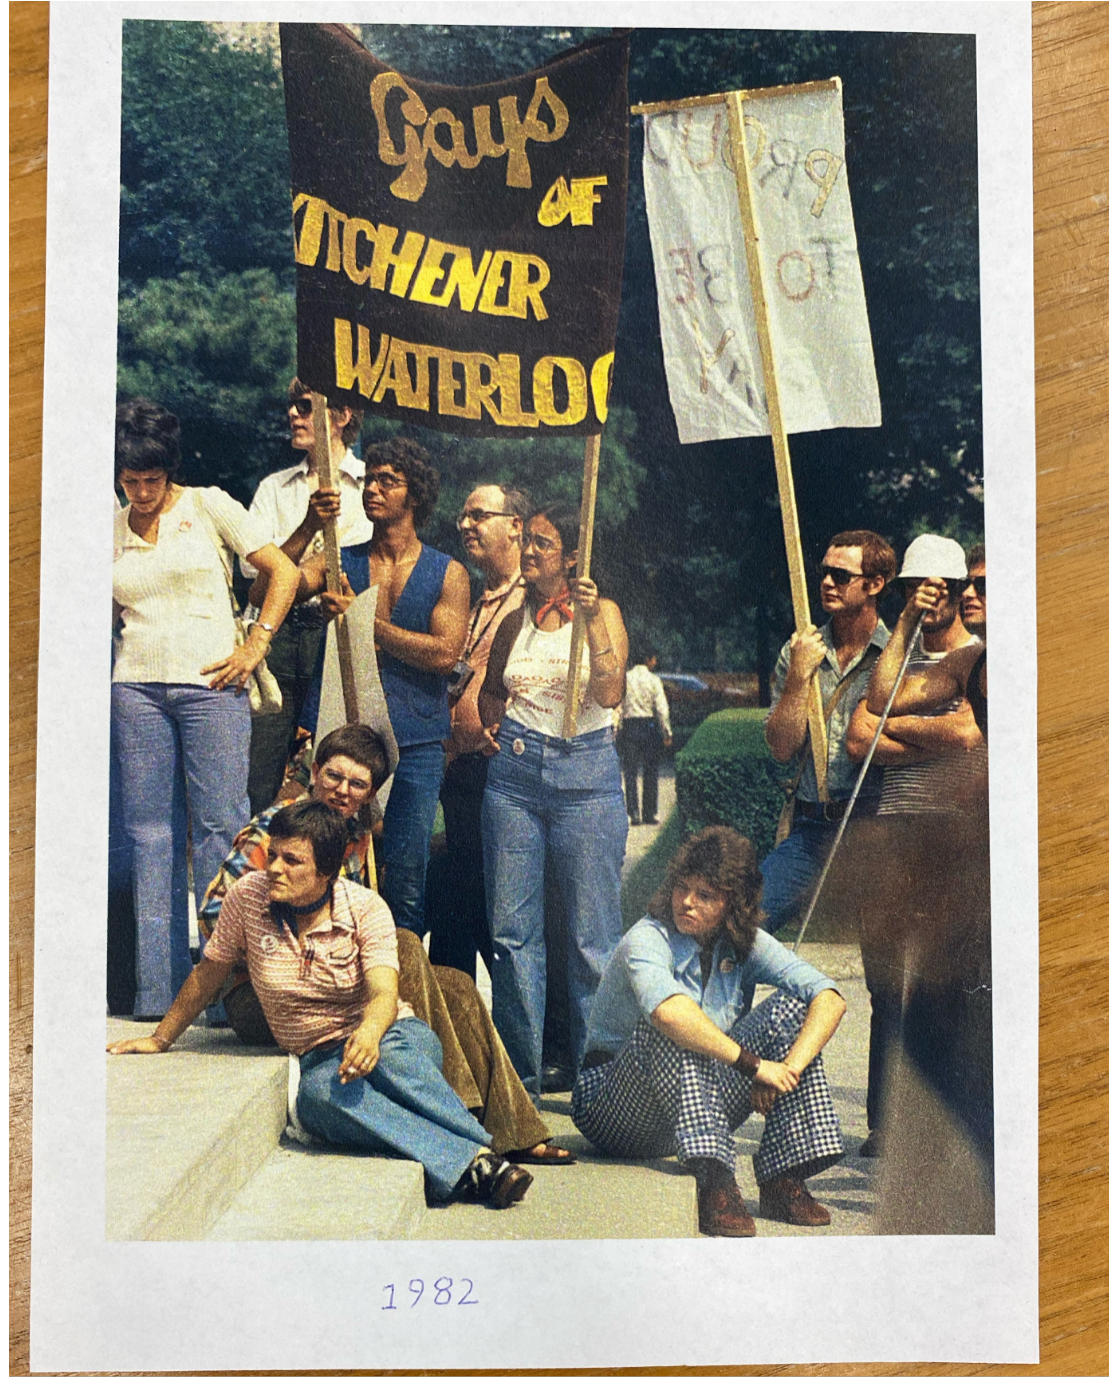 A photo of LGBTQ+ people demonstrating, two of them hold a yellow and brown banner that reads "Gays of Kitchener Waterloo", from 1982.